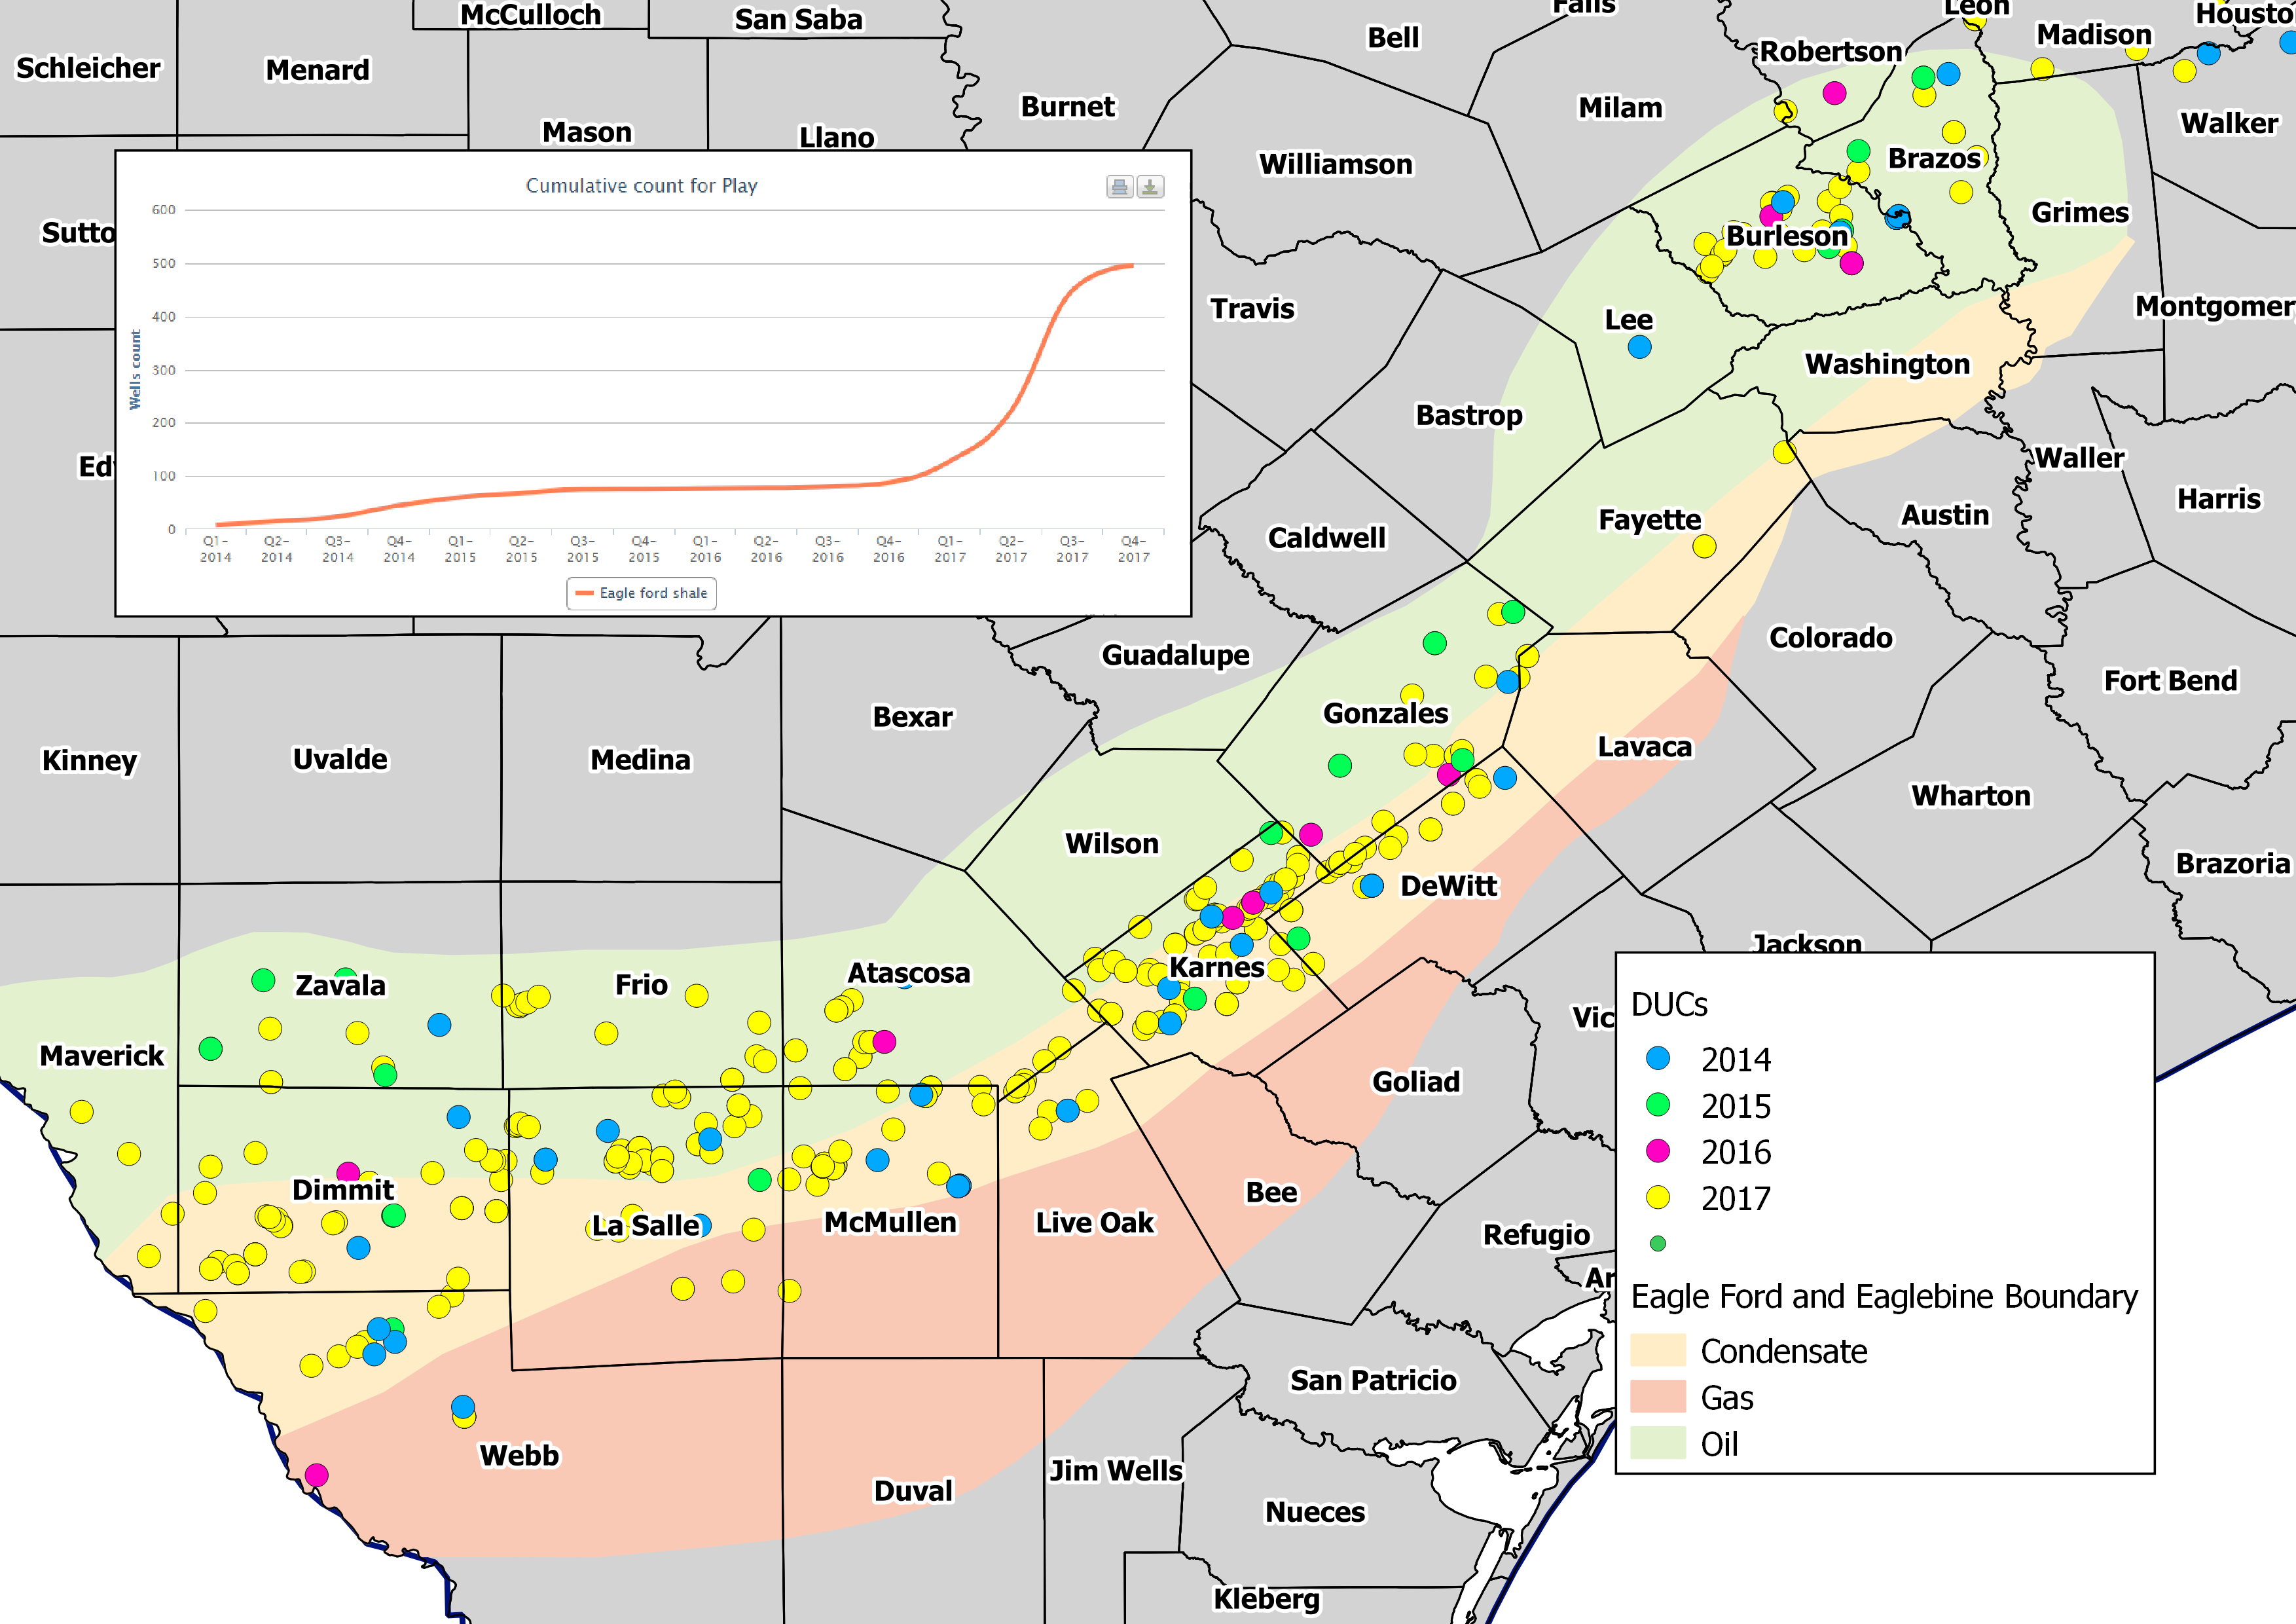 Eagle Ford Shale Drilled / Uncompleted (DUCs) [Cumulative]